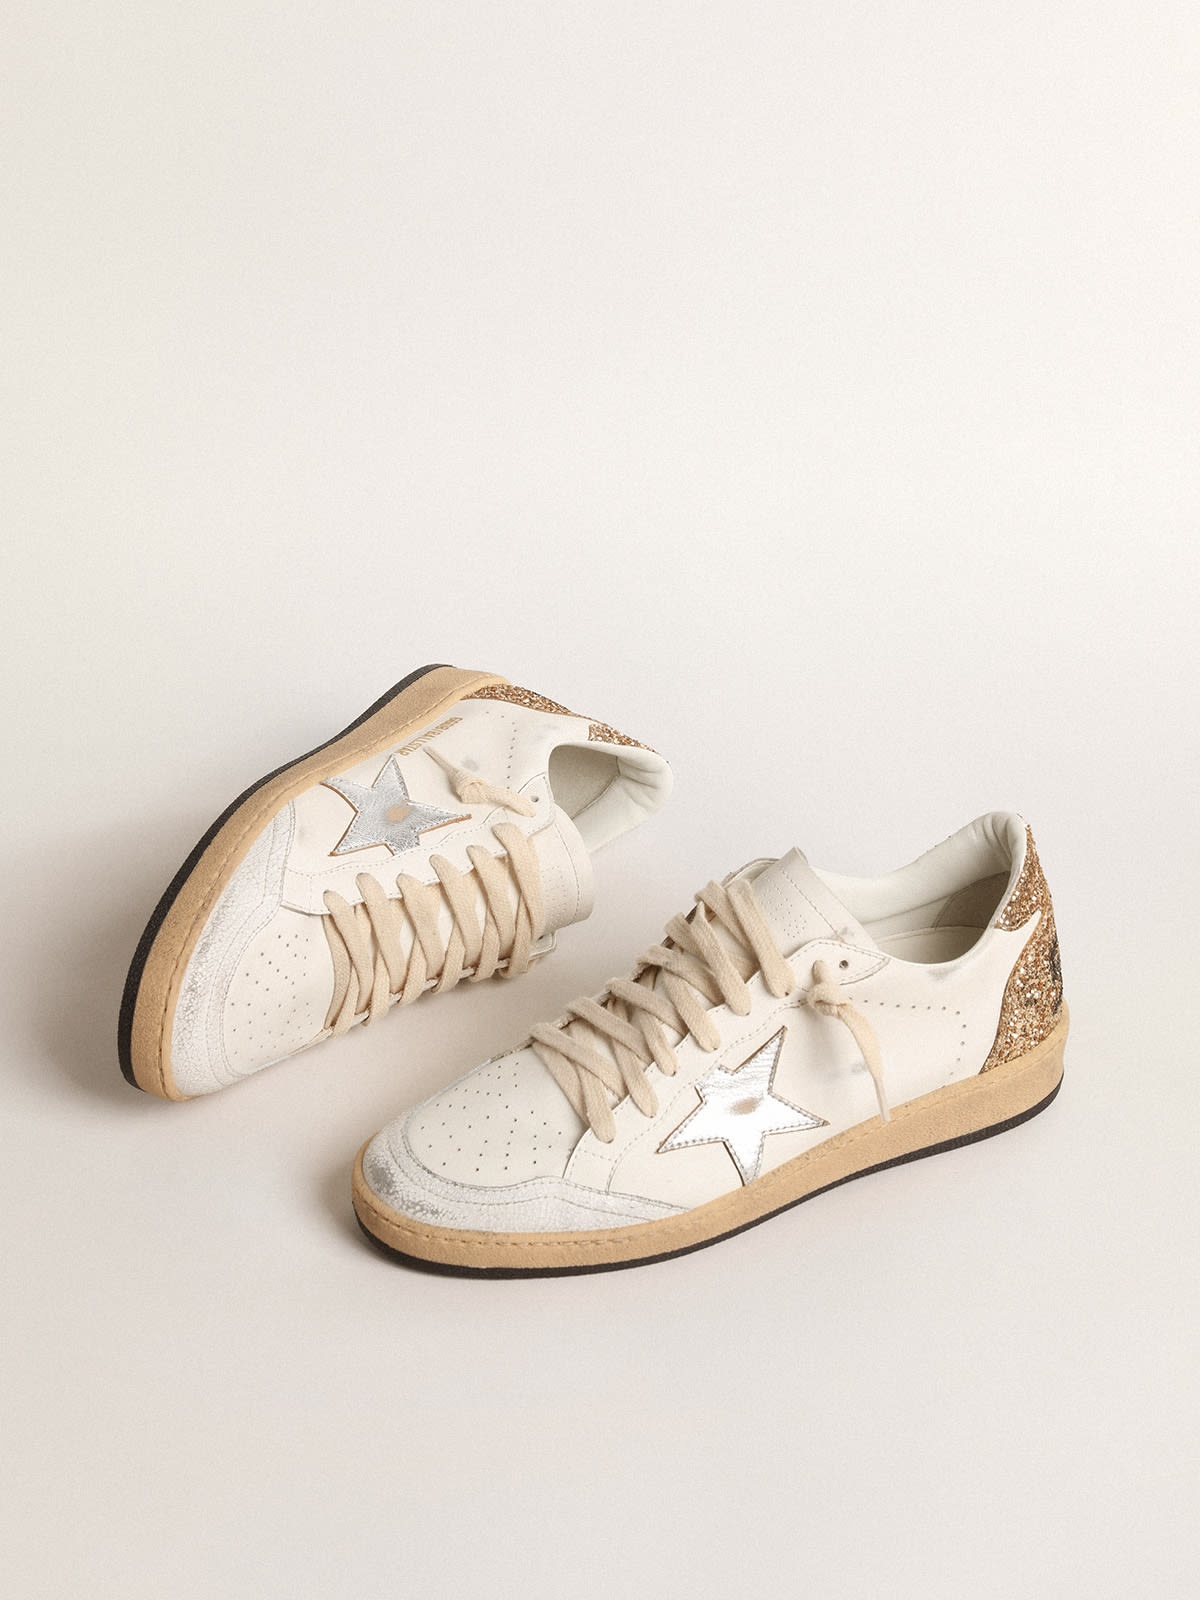 Ball Star with metallic leather star and glitter heel tab - 2